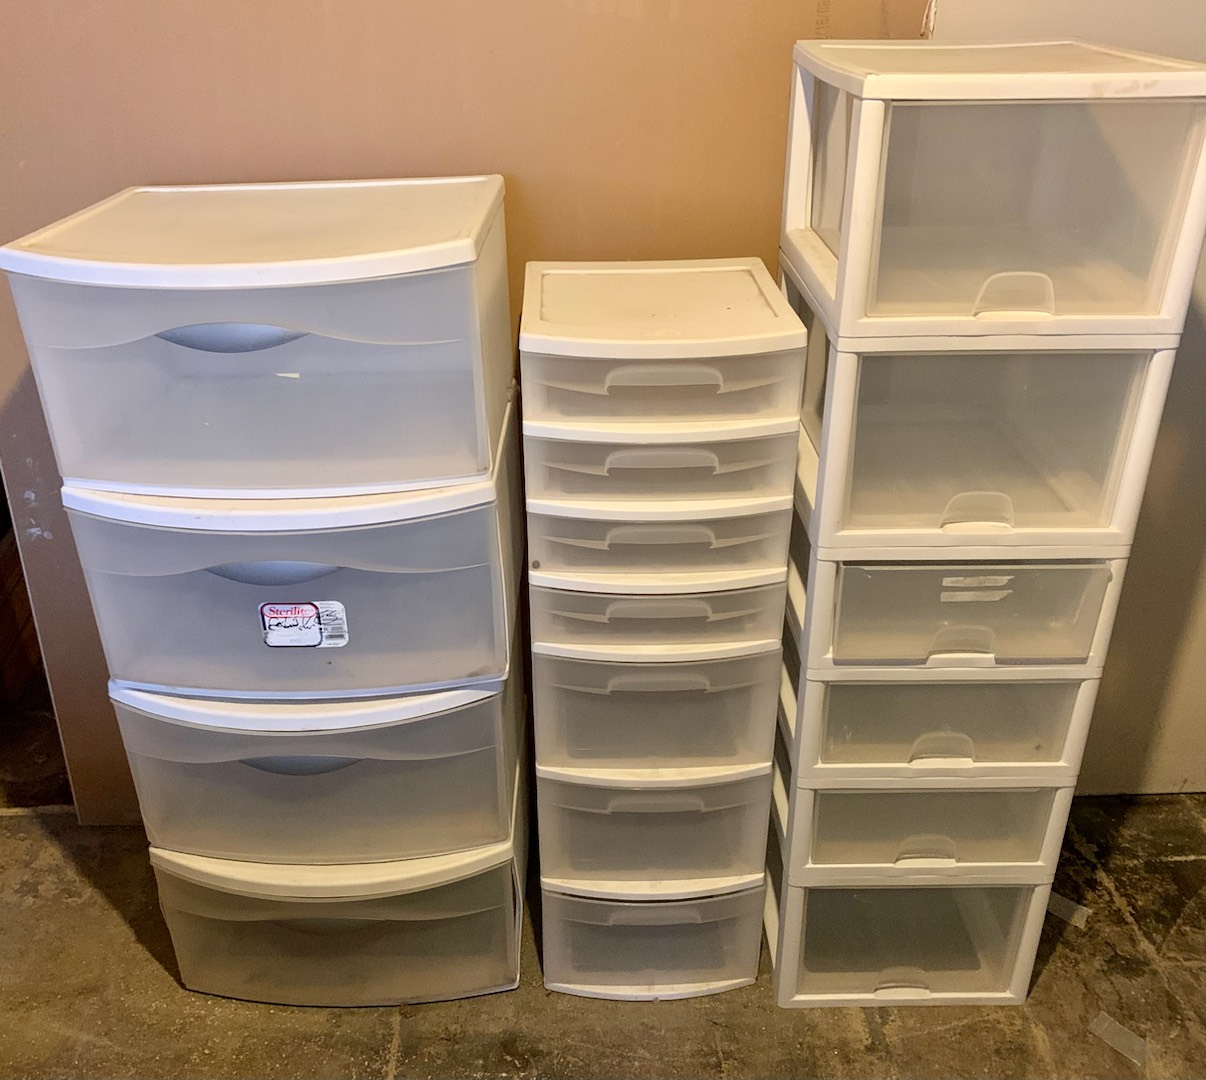 Sold at Auction: 2 Plastic Organizers 5 Drawers each